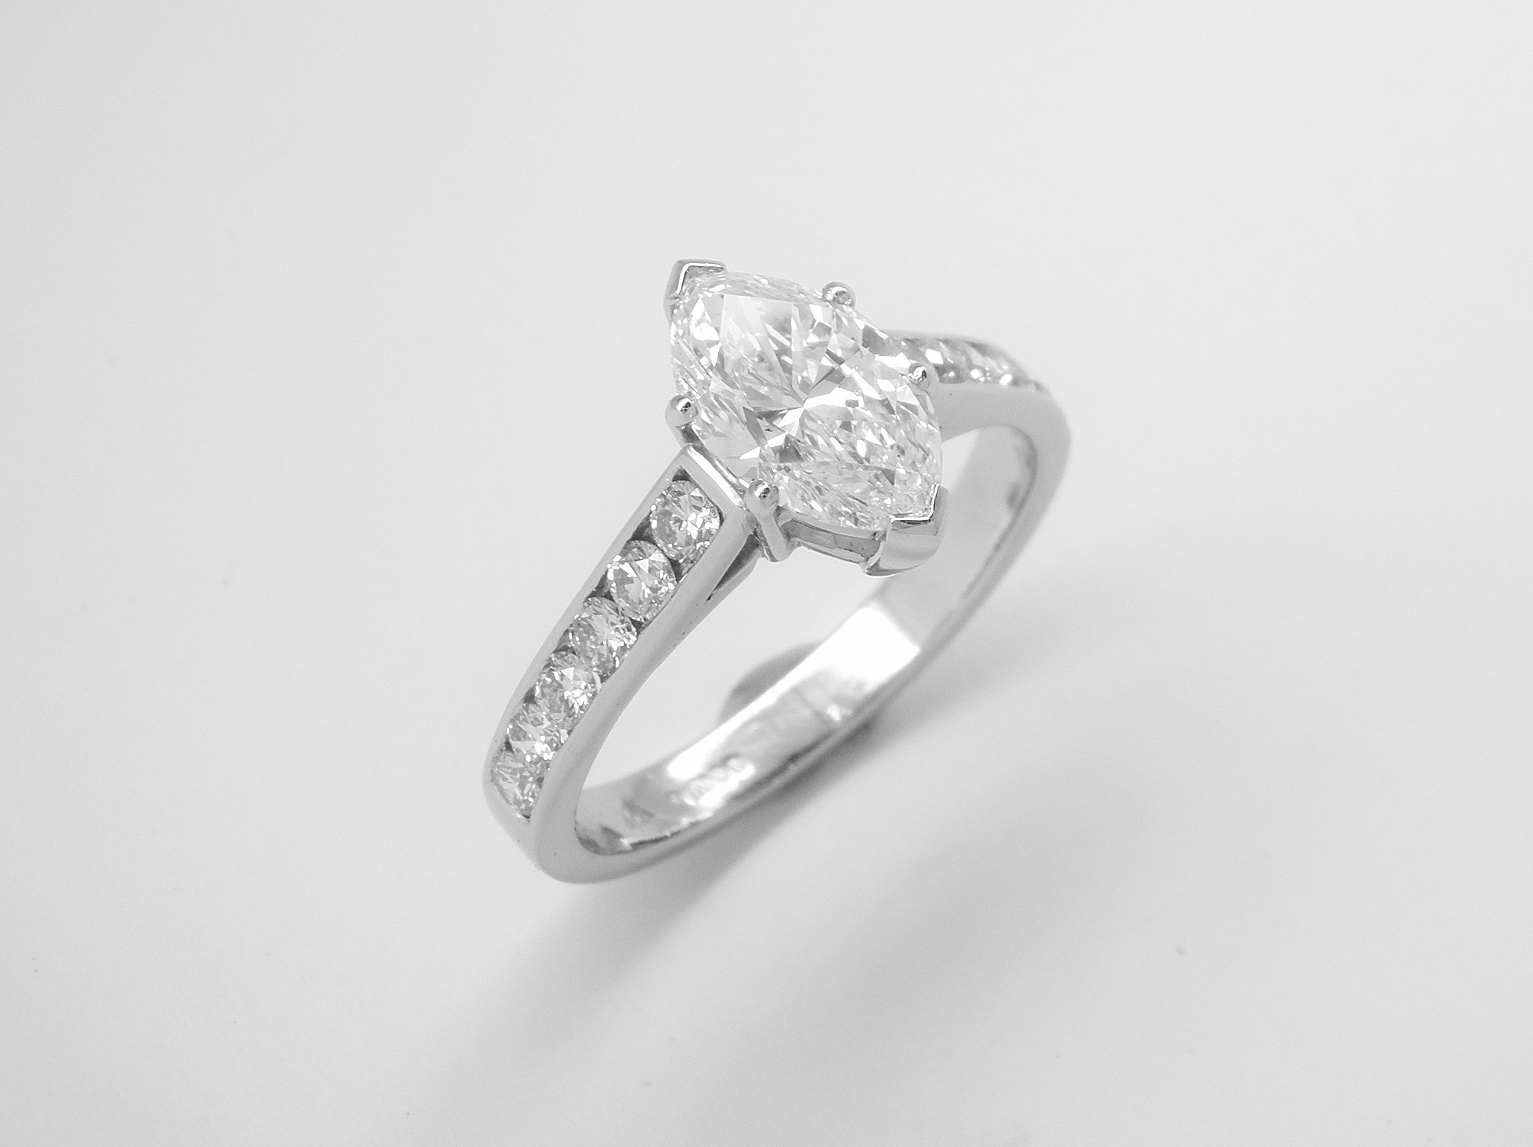 A single stone marquise diamond ring mounted in platinum with 6 round brilliant cut diamonds channel set into each shoulder.